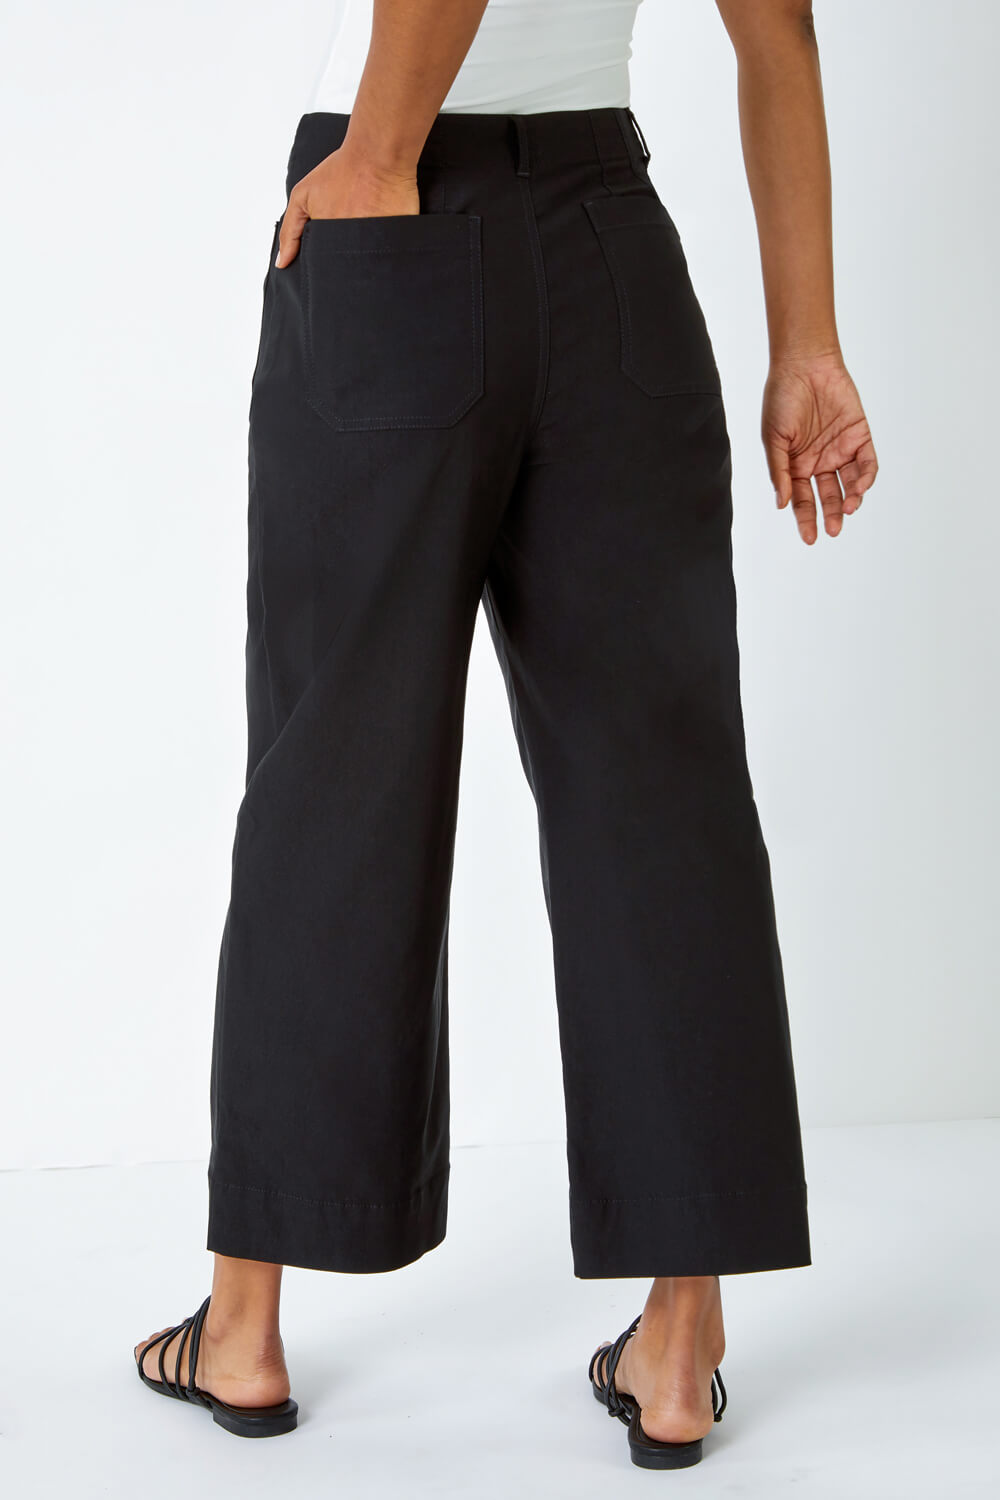 Black Pocket Detail Cropped Stretch Culottes, Image 3 of 5